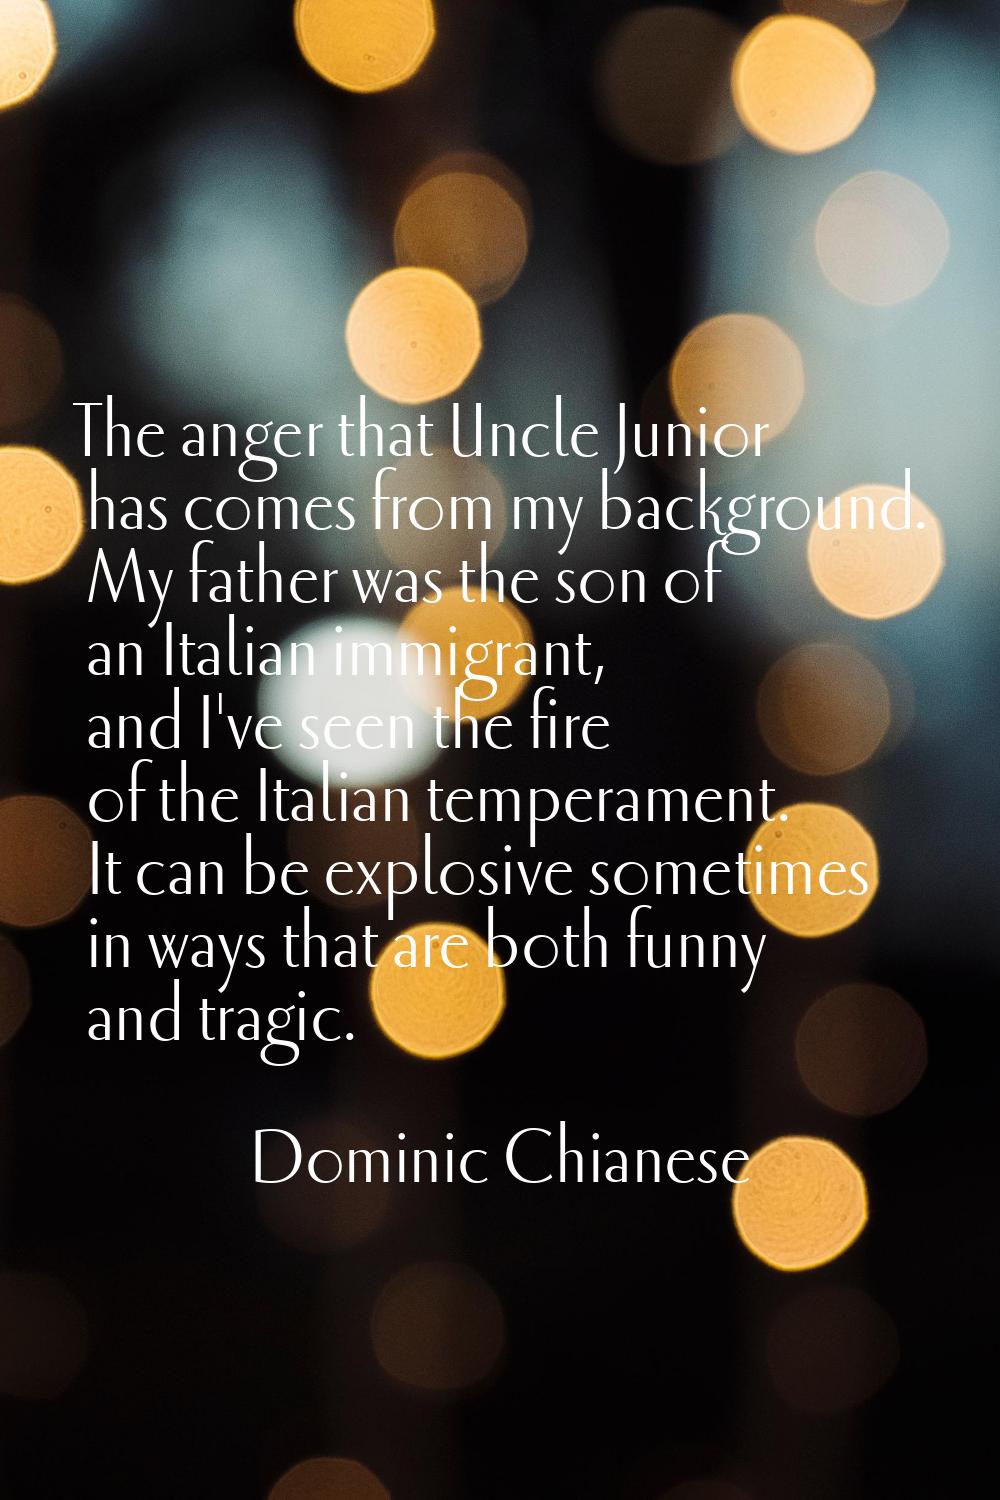 The anger that Uncle Junior has comes from my background. My father was the son of an Italian immig